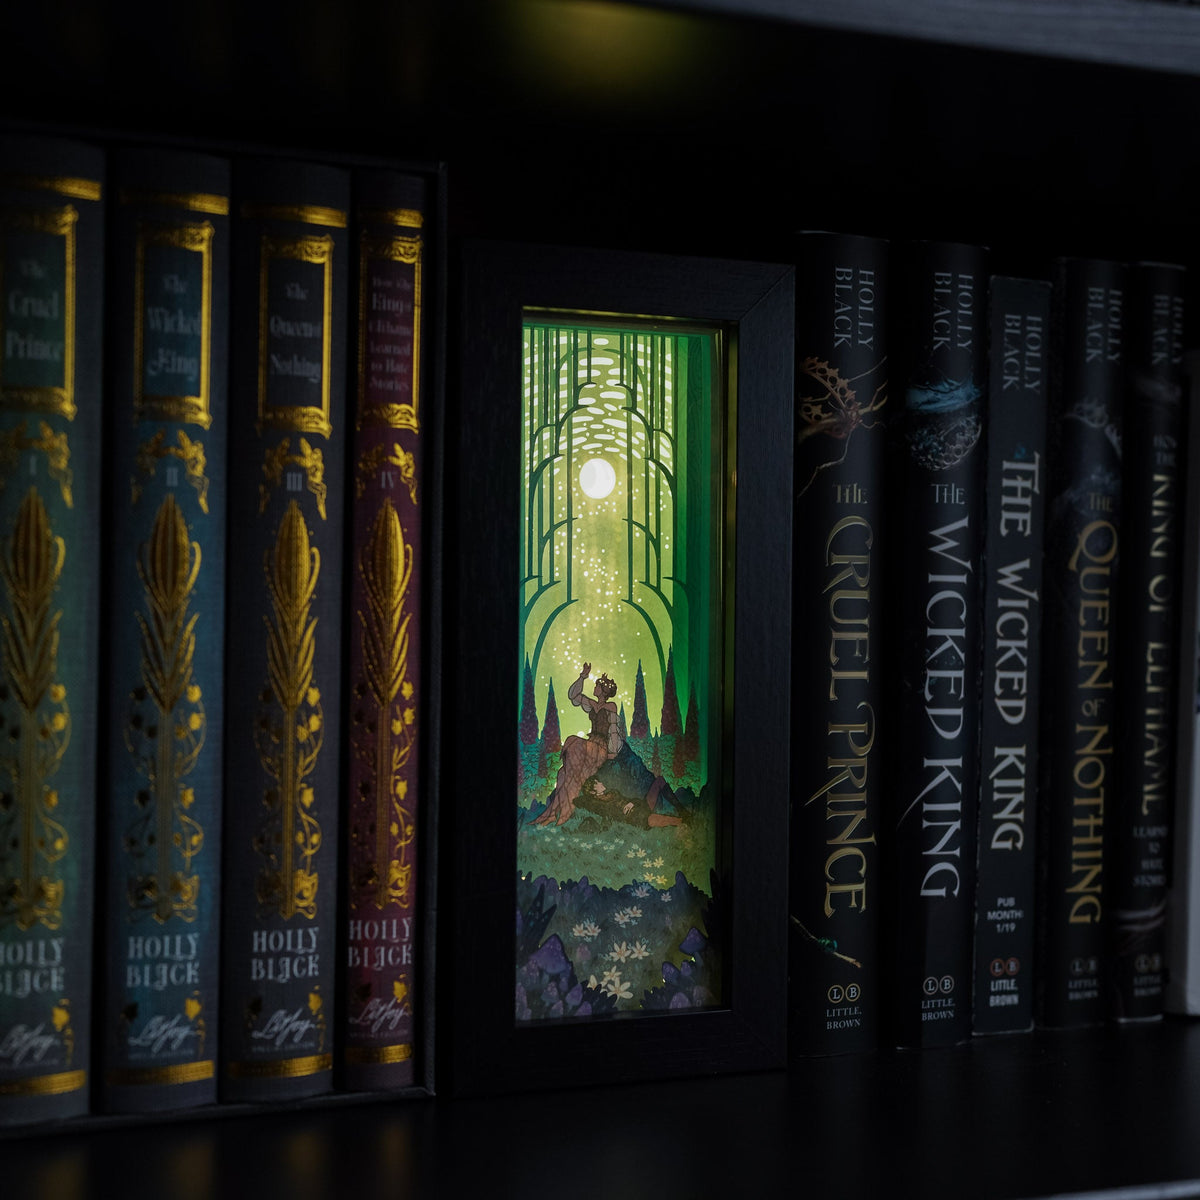 The Cruel Prince Elfhame Bookshelf Alley with an image of Jude and Cardan sitting together in a forest.